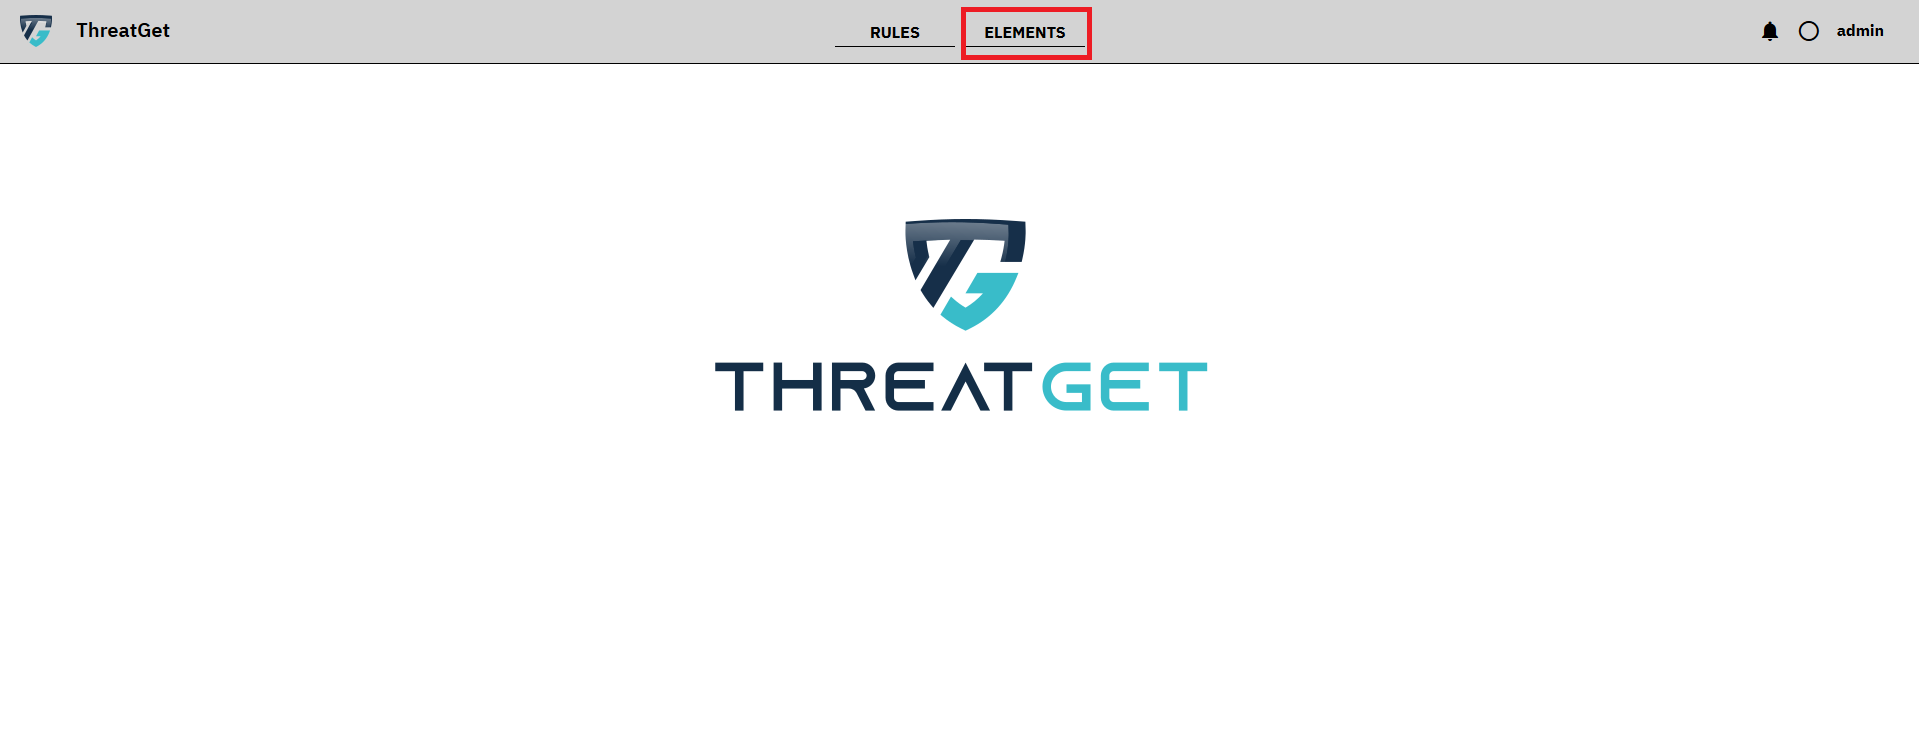 ThreatGet overview screen with marked elements button